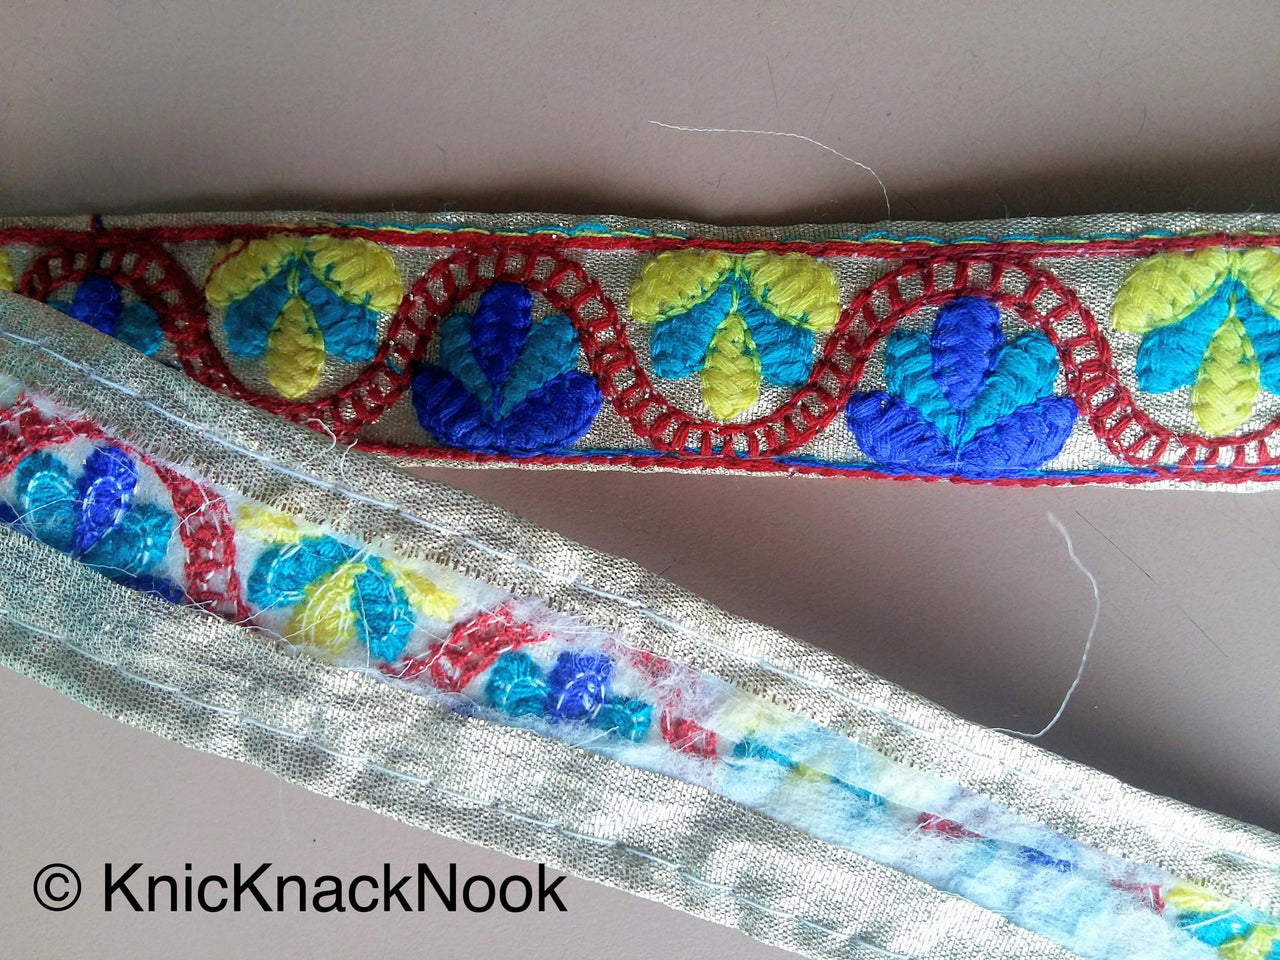 Gold Shimmer Fabric Trim With Blue, Yellow And Red Floral Embroidery, Approx. 30mm Wide - 200317L194